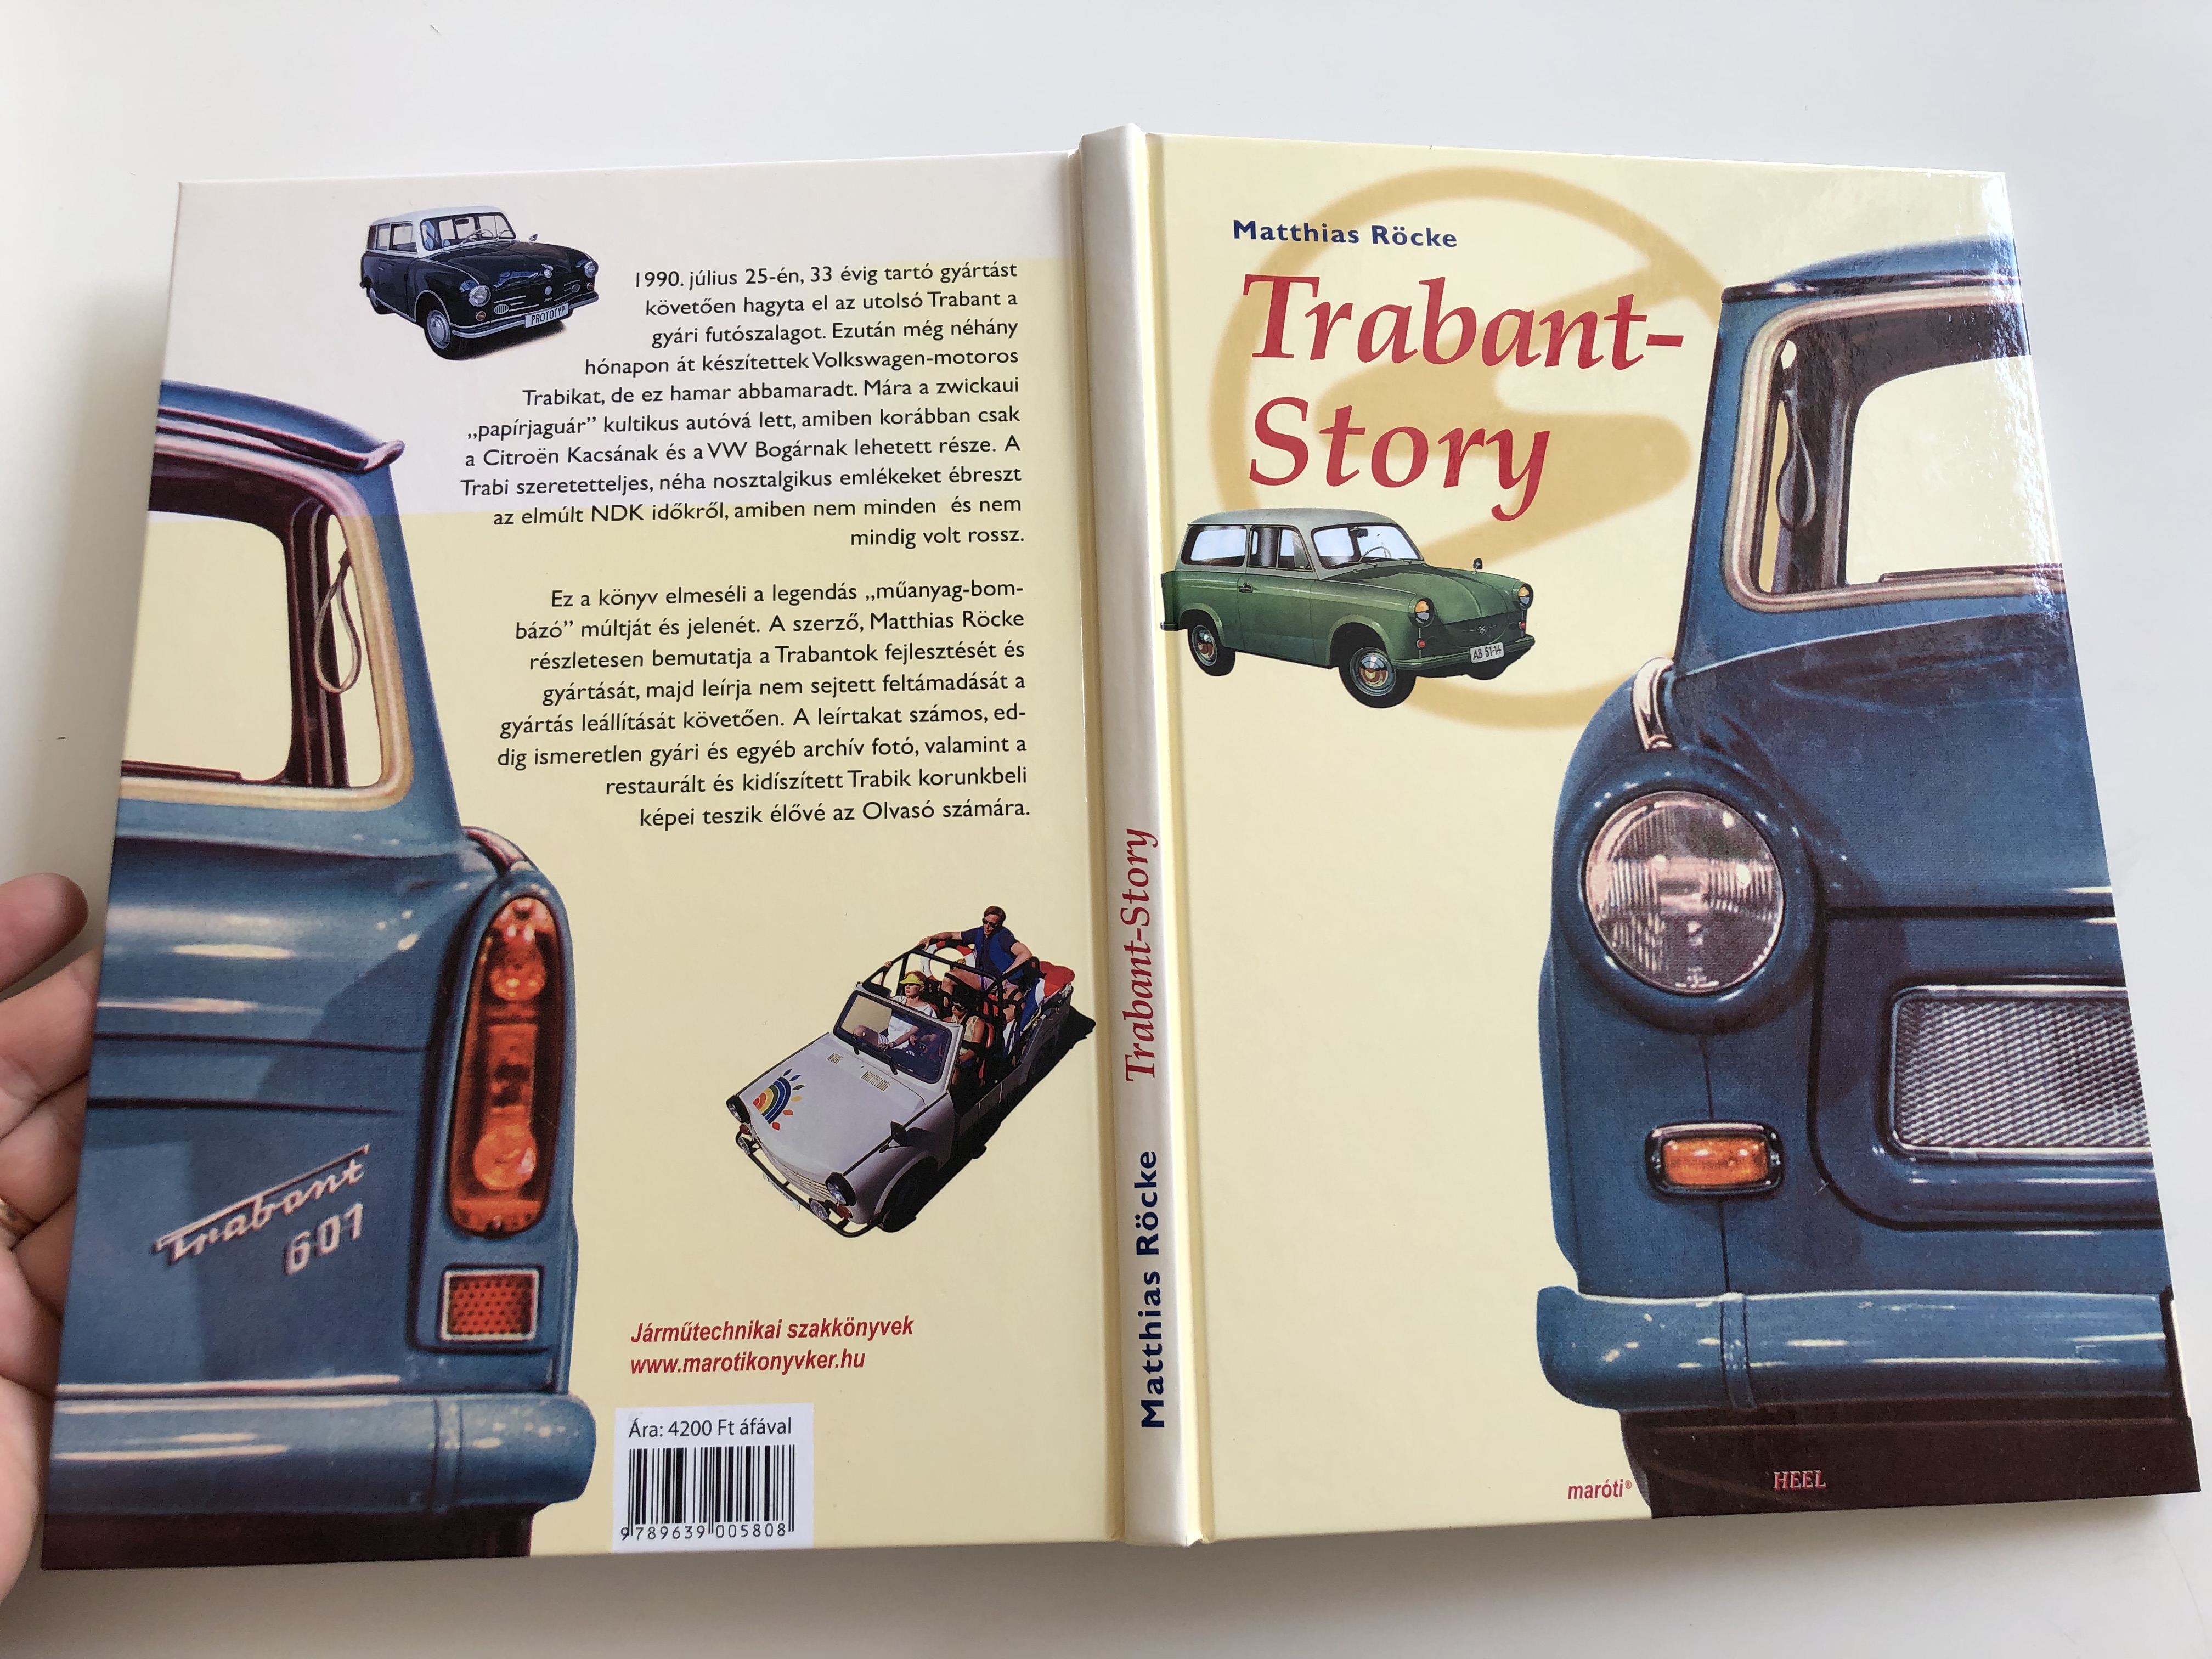 trabant-story-by-matthias-r-cke-hungarian-edition-of-die-trabi-story-trabant-the-popular-east-german-car-history-culture-technical-details-hardcover-2007-mar-ti-k-nyvkiad-23-.jpg